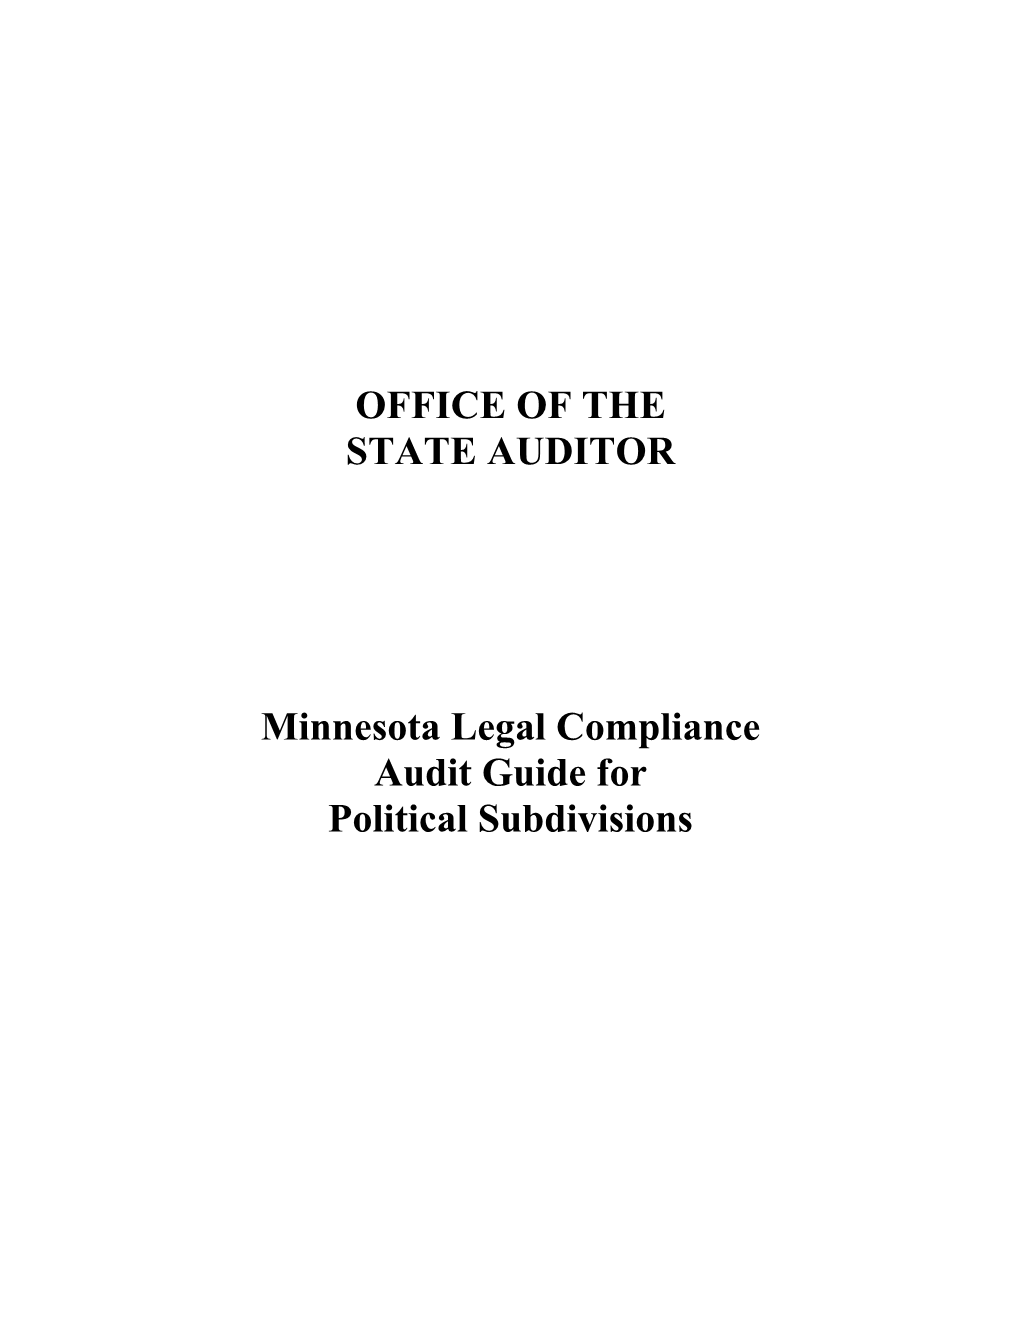 2009 Minnesota Legal Compliance Audit Guide for Local Governments Introduction